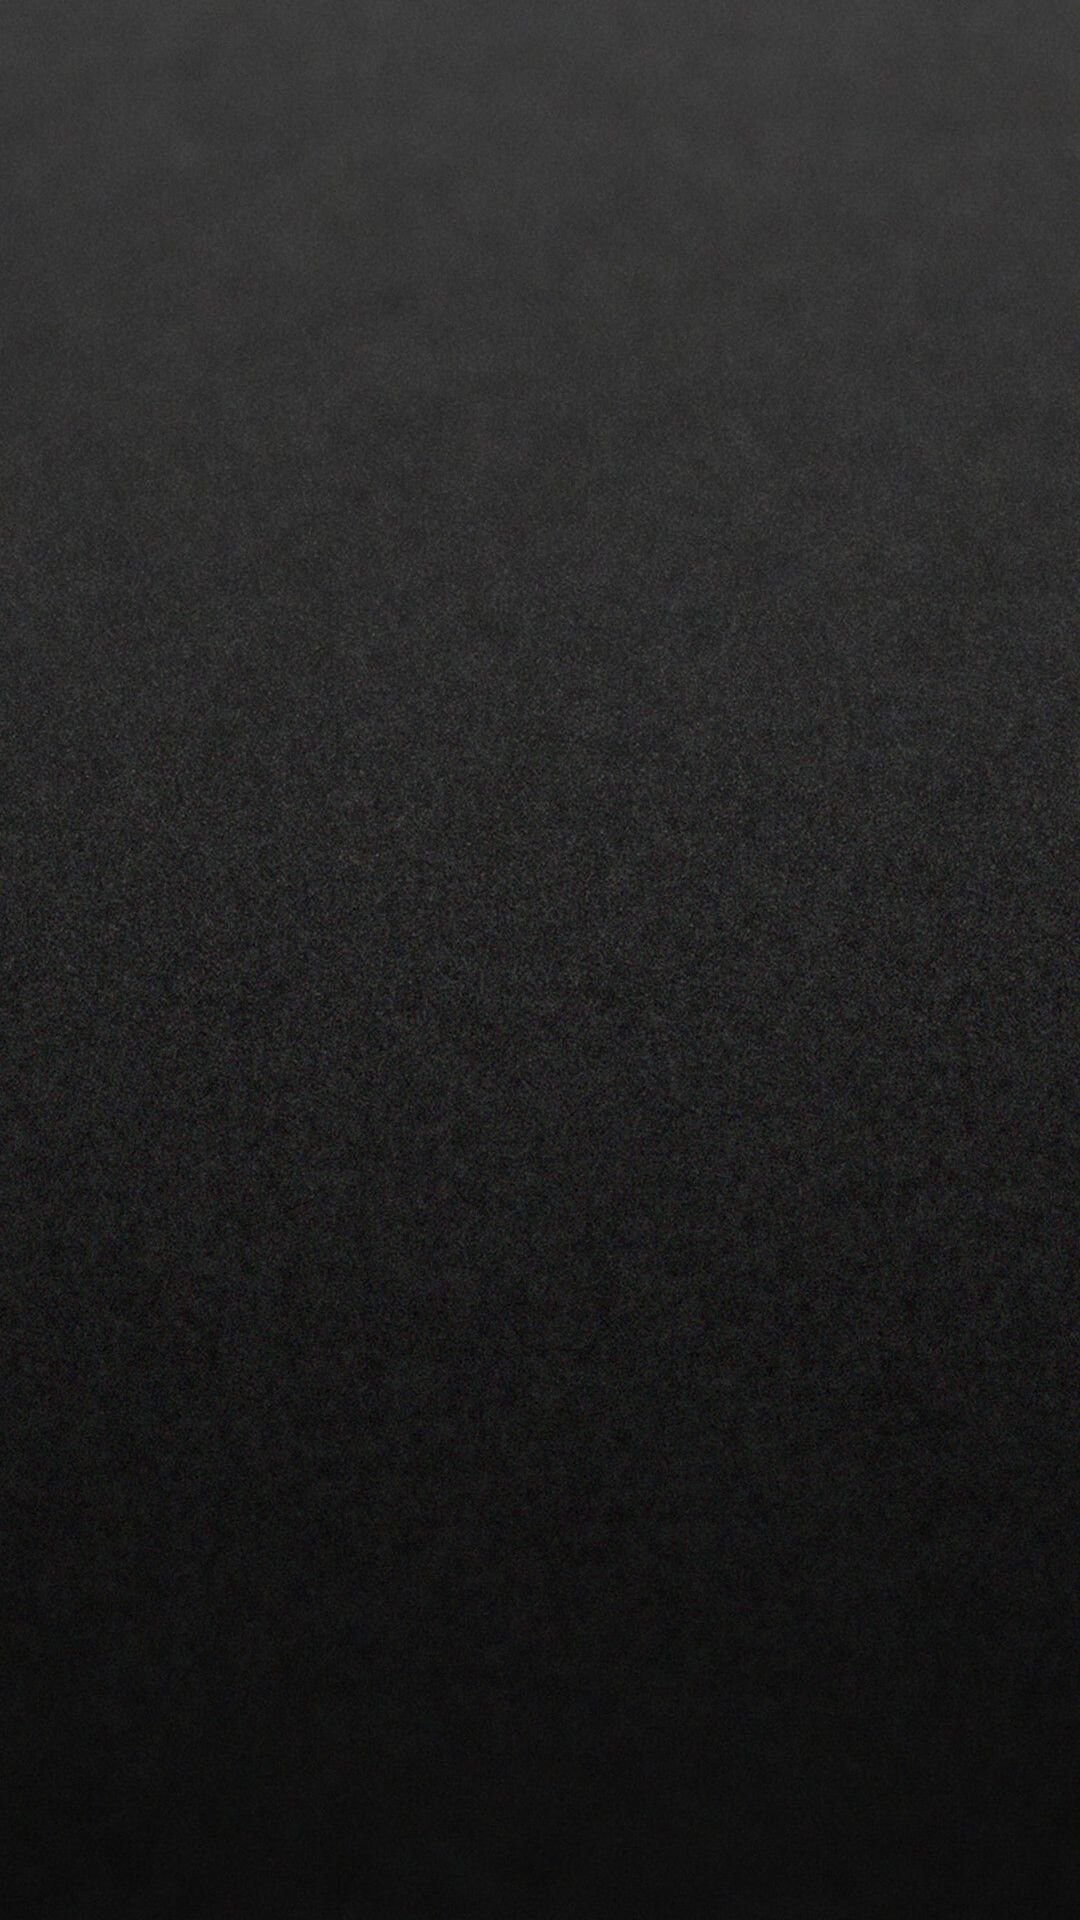 Absolute Black Wallpaper Free Absolute Black Background